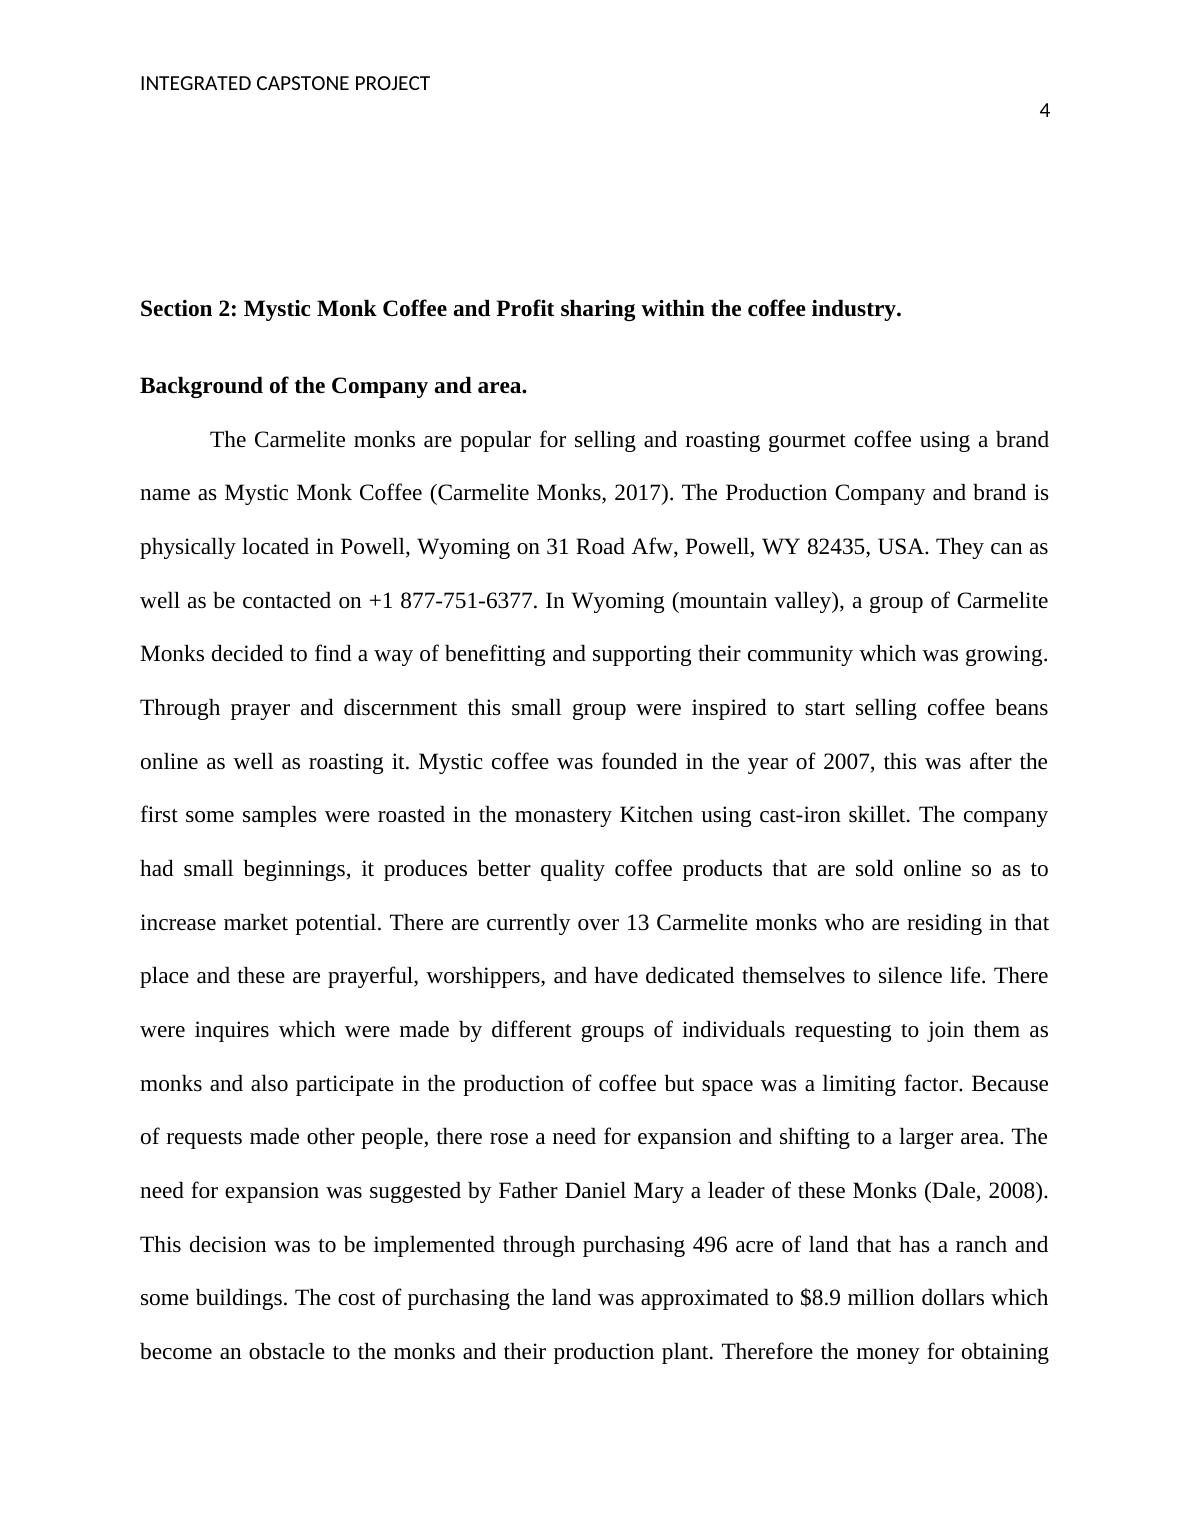 Integrated Capstone Project Assignment PDF_4